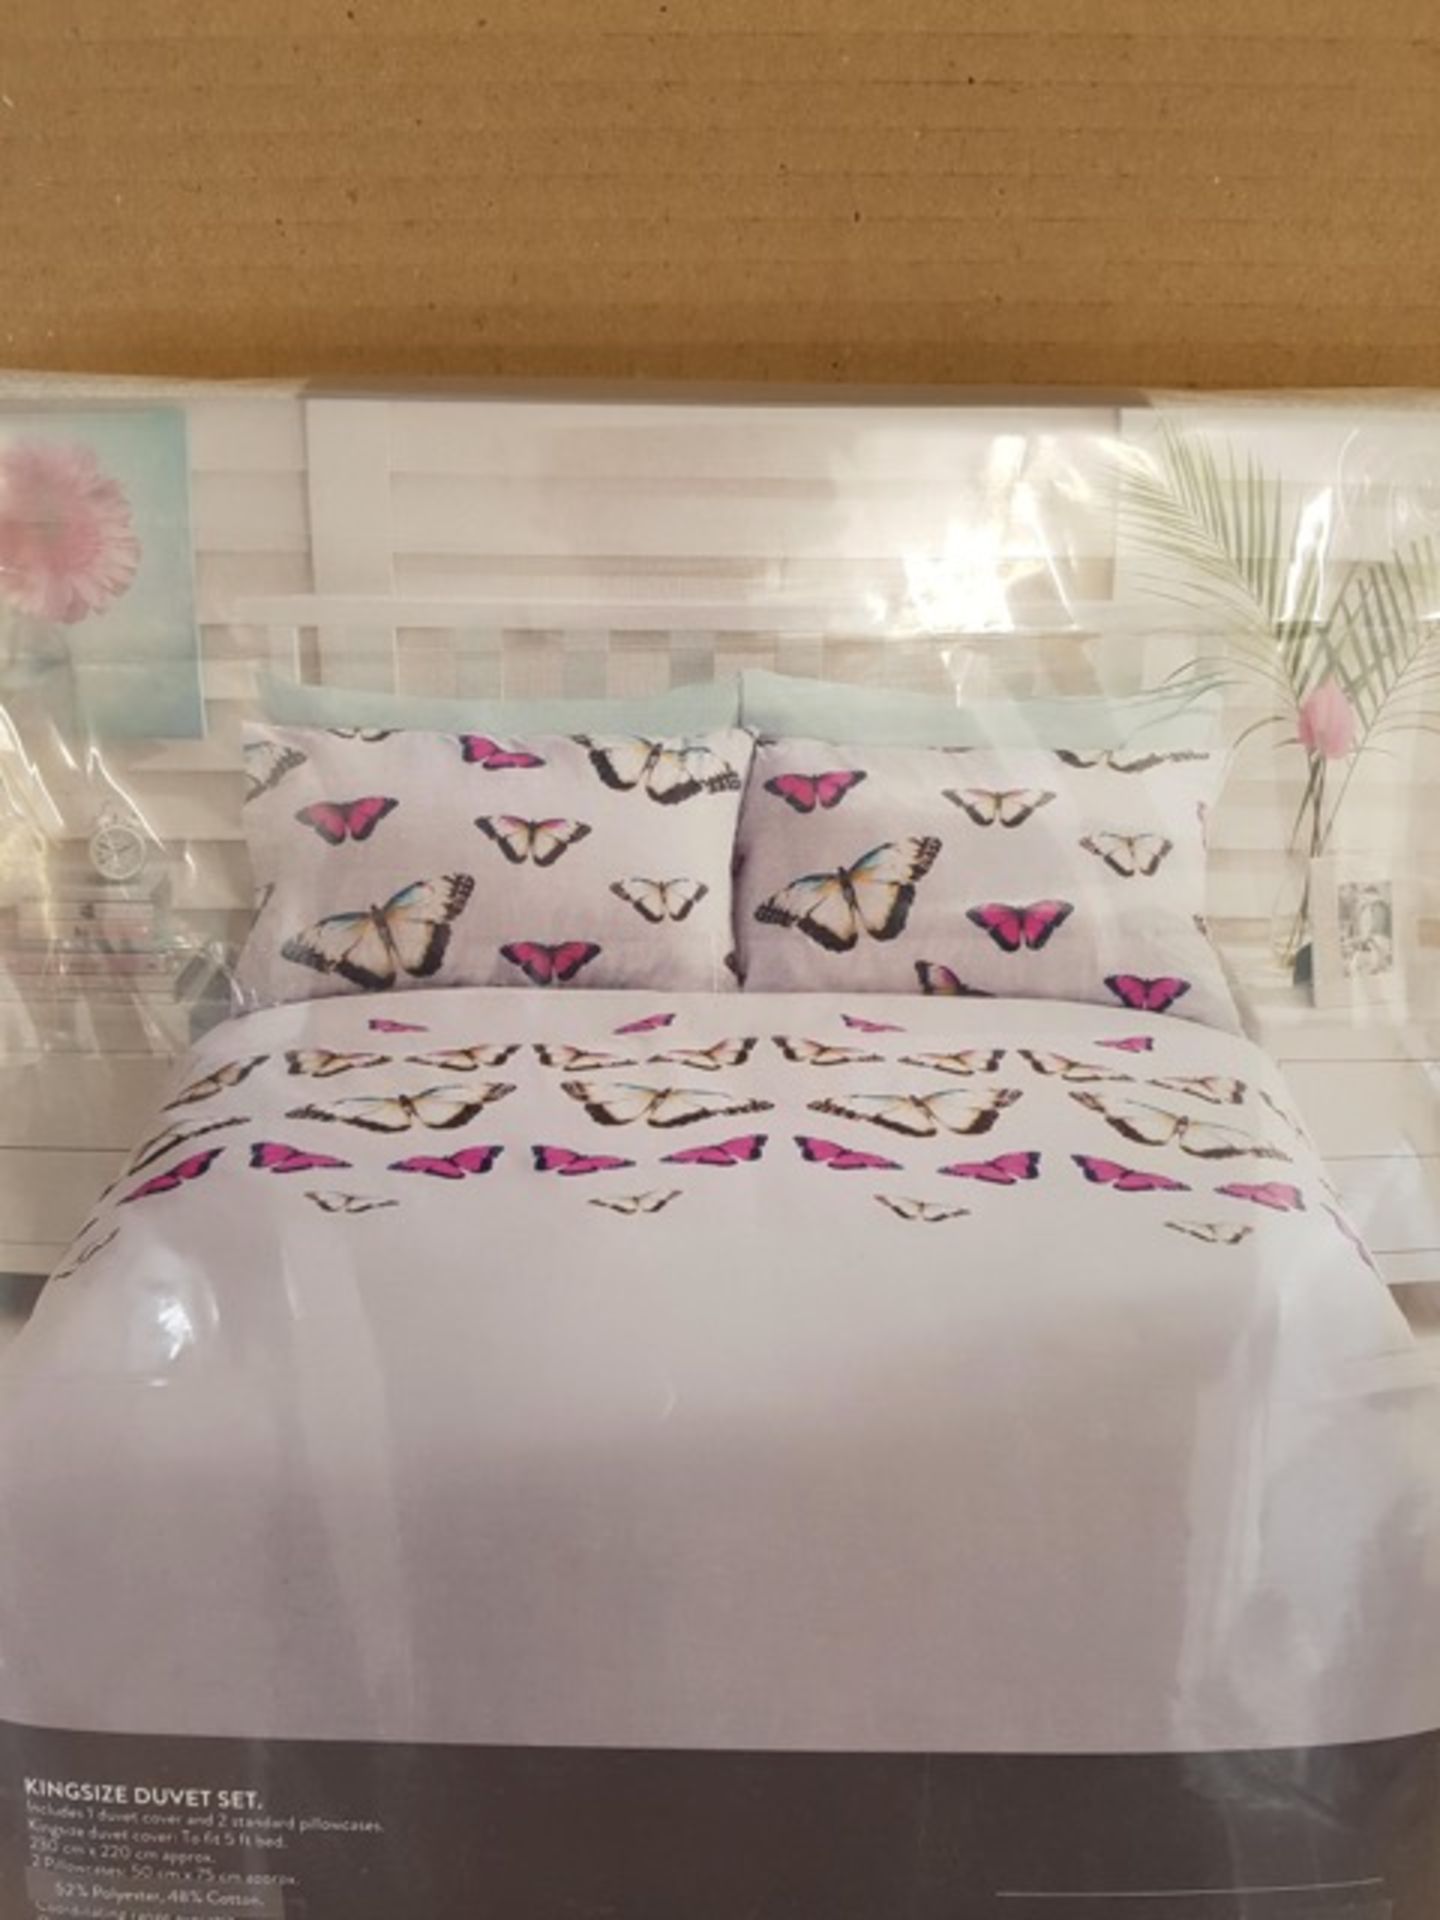 PALLET TO CONTIAN 96 x Brand New Sleep Digital Butterfly Easy Care King Size Duvet Sets - Image 3 of 3